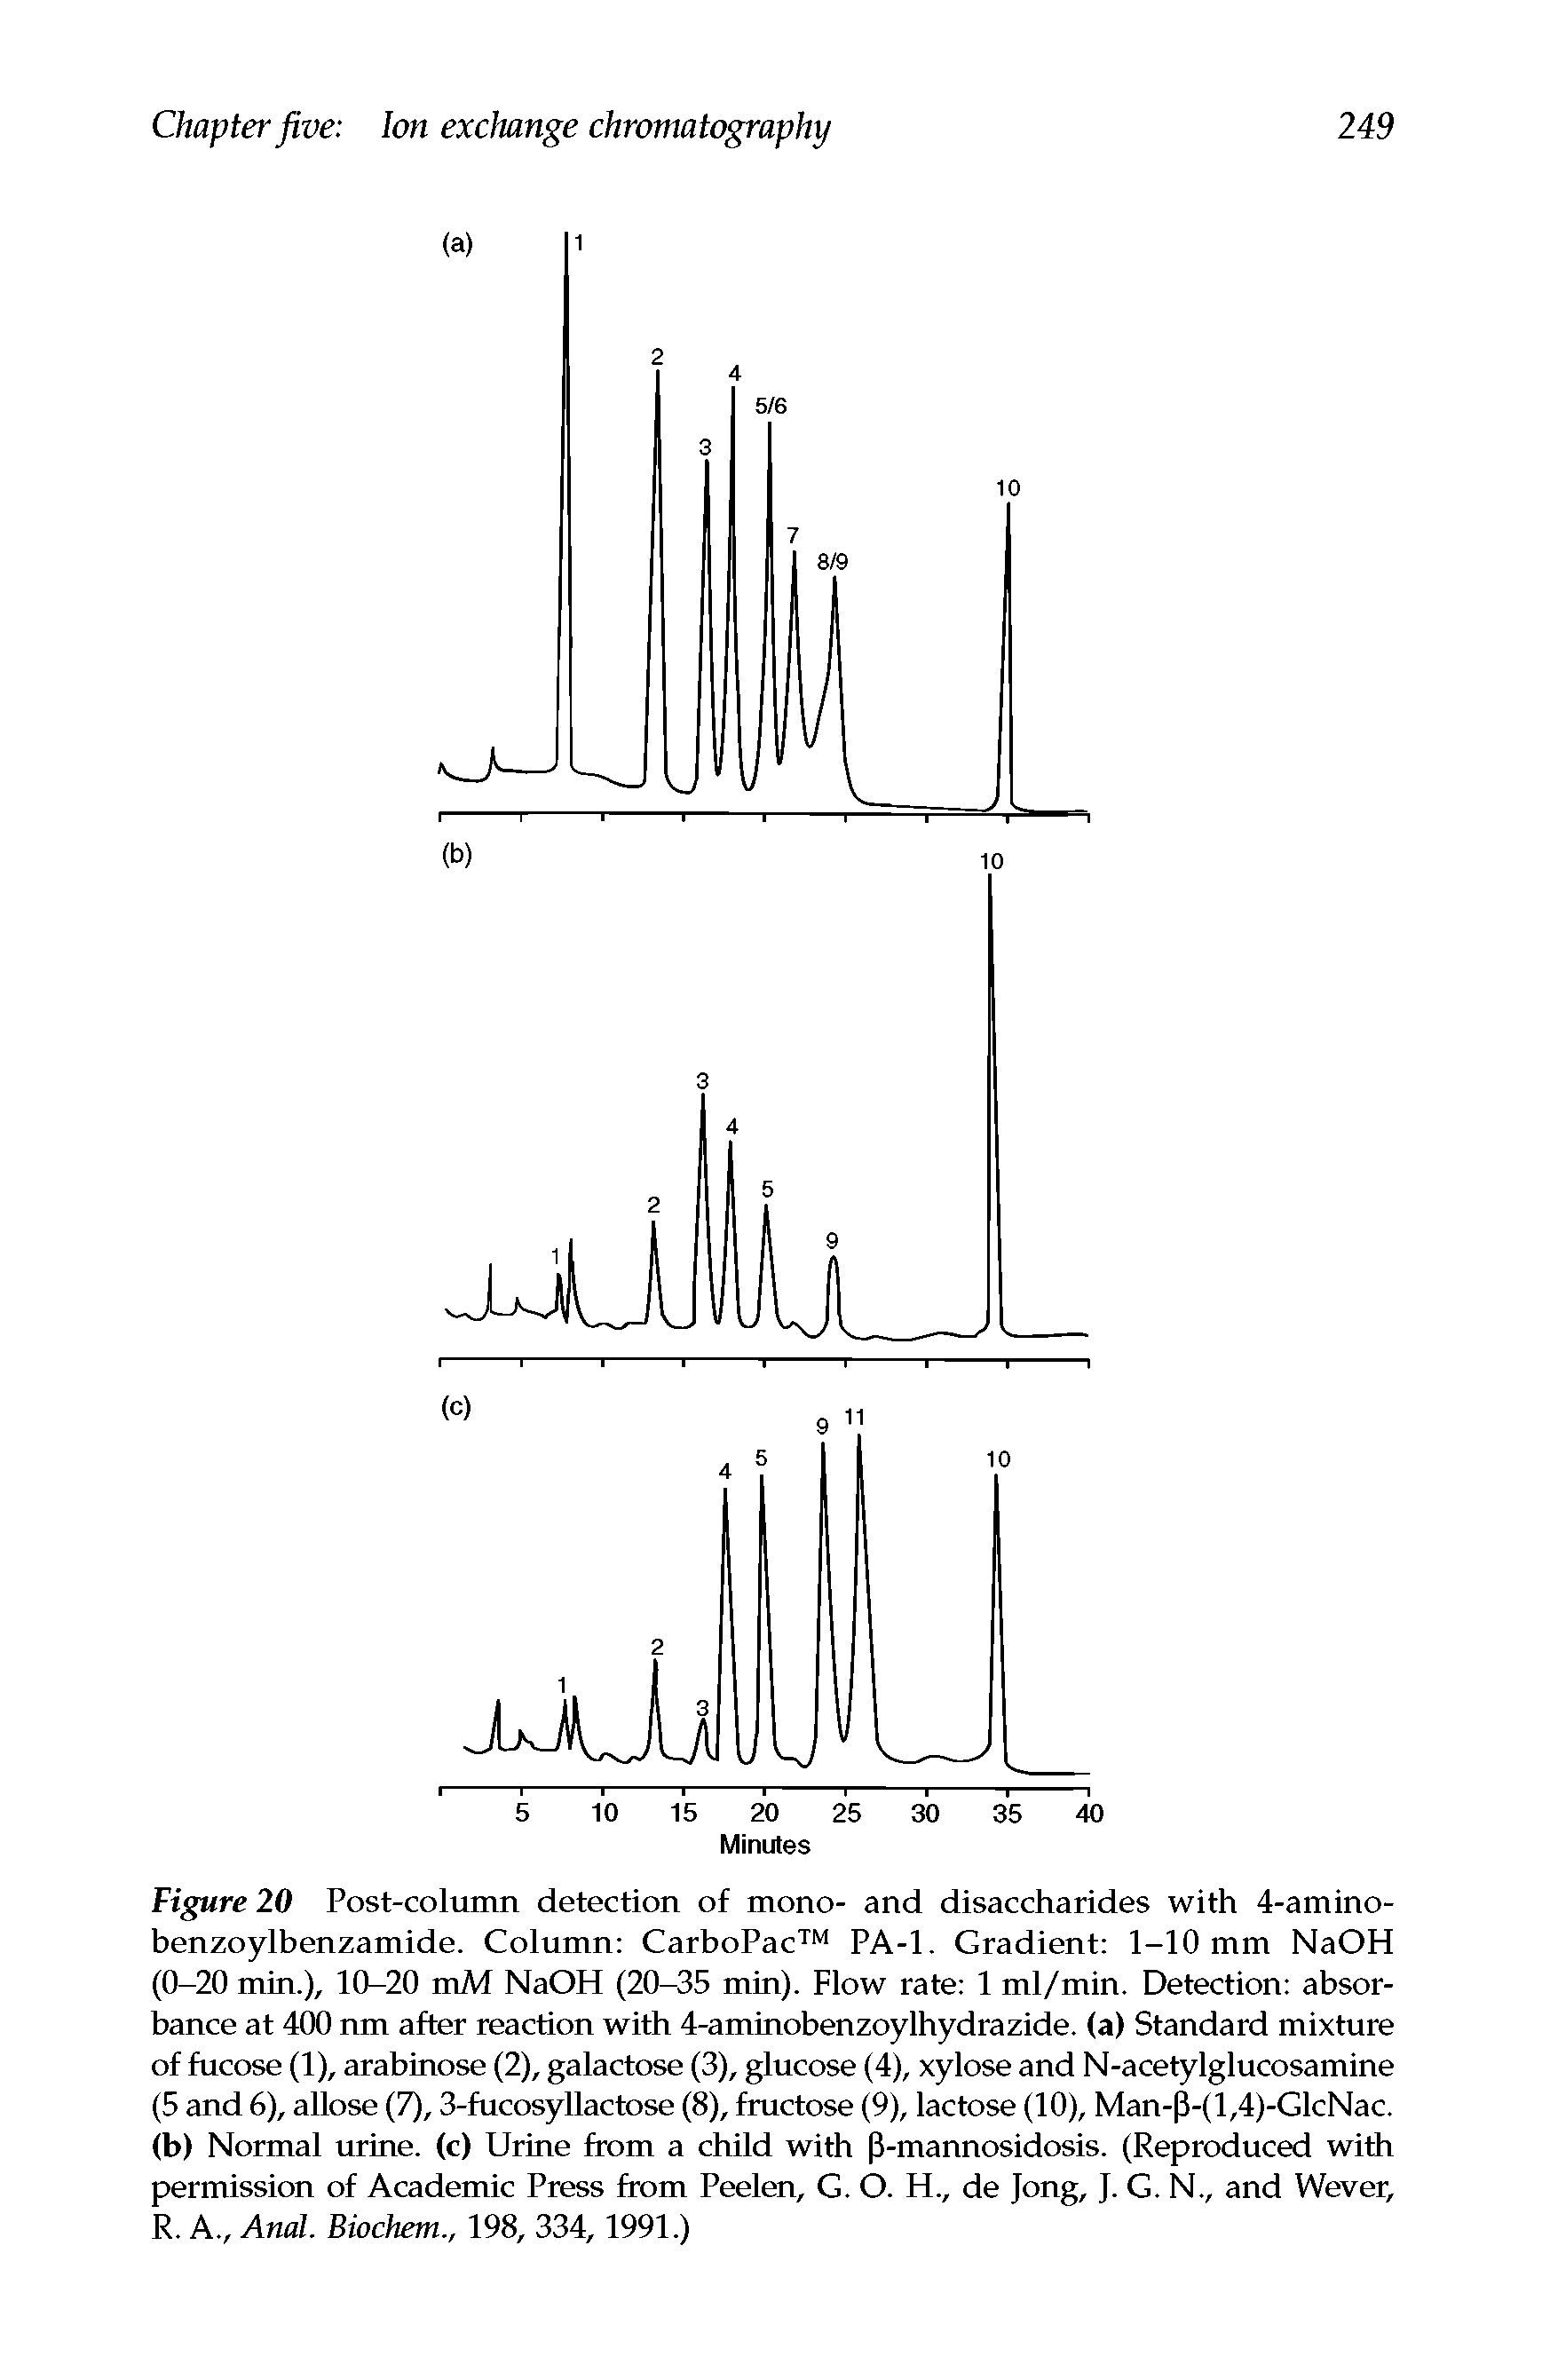 Figure 20 Post-column detection of mono- and disaccharides with 4-amino-benzoylbenzamide. Column CarboPac PA-1. Gradient 1-10 mm NaOH (0-20 min.), 10-20 mM NaOH (20-35 min). Flow rate 1 ml/min. Detection absorbance at 400 nm after reaction with 4-aminobenzoylhydrazide. (a) Standard mixture of fucose (1), arabinose (2), galactose (3), glucose (4), xylose and N-acetylglucosamine (5 and 6), allose (7), 3-fucosyllactose (8), fructose (9), lactose (10), Man-(3-(l,4)-GlcNac. (b) Normal urine, (c) Urine from a child with (3-mannosidosis. (Reproduced with permission of Academic Press from Peelen, G. O. H., de Jong, J. G. N., and Wever, R. A., Anal. Biochem., 198, 334, 1991.)...